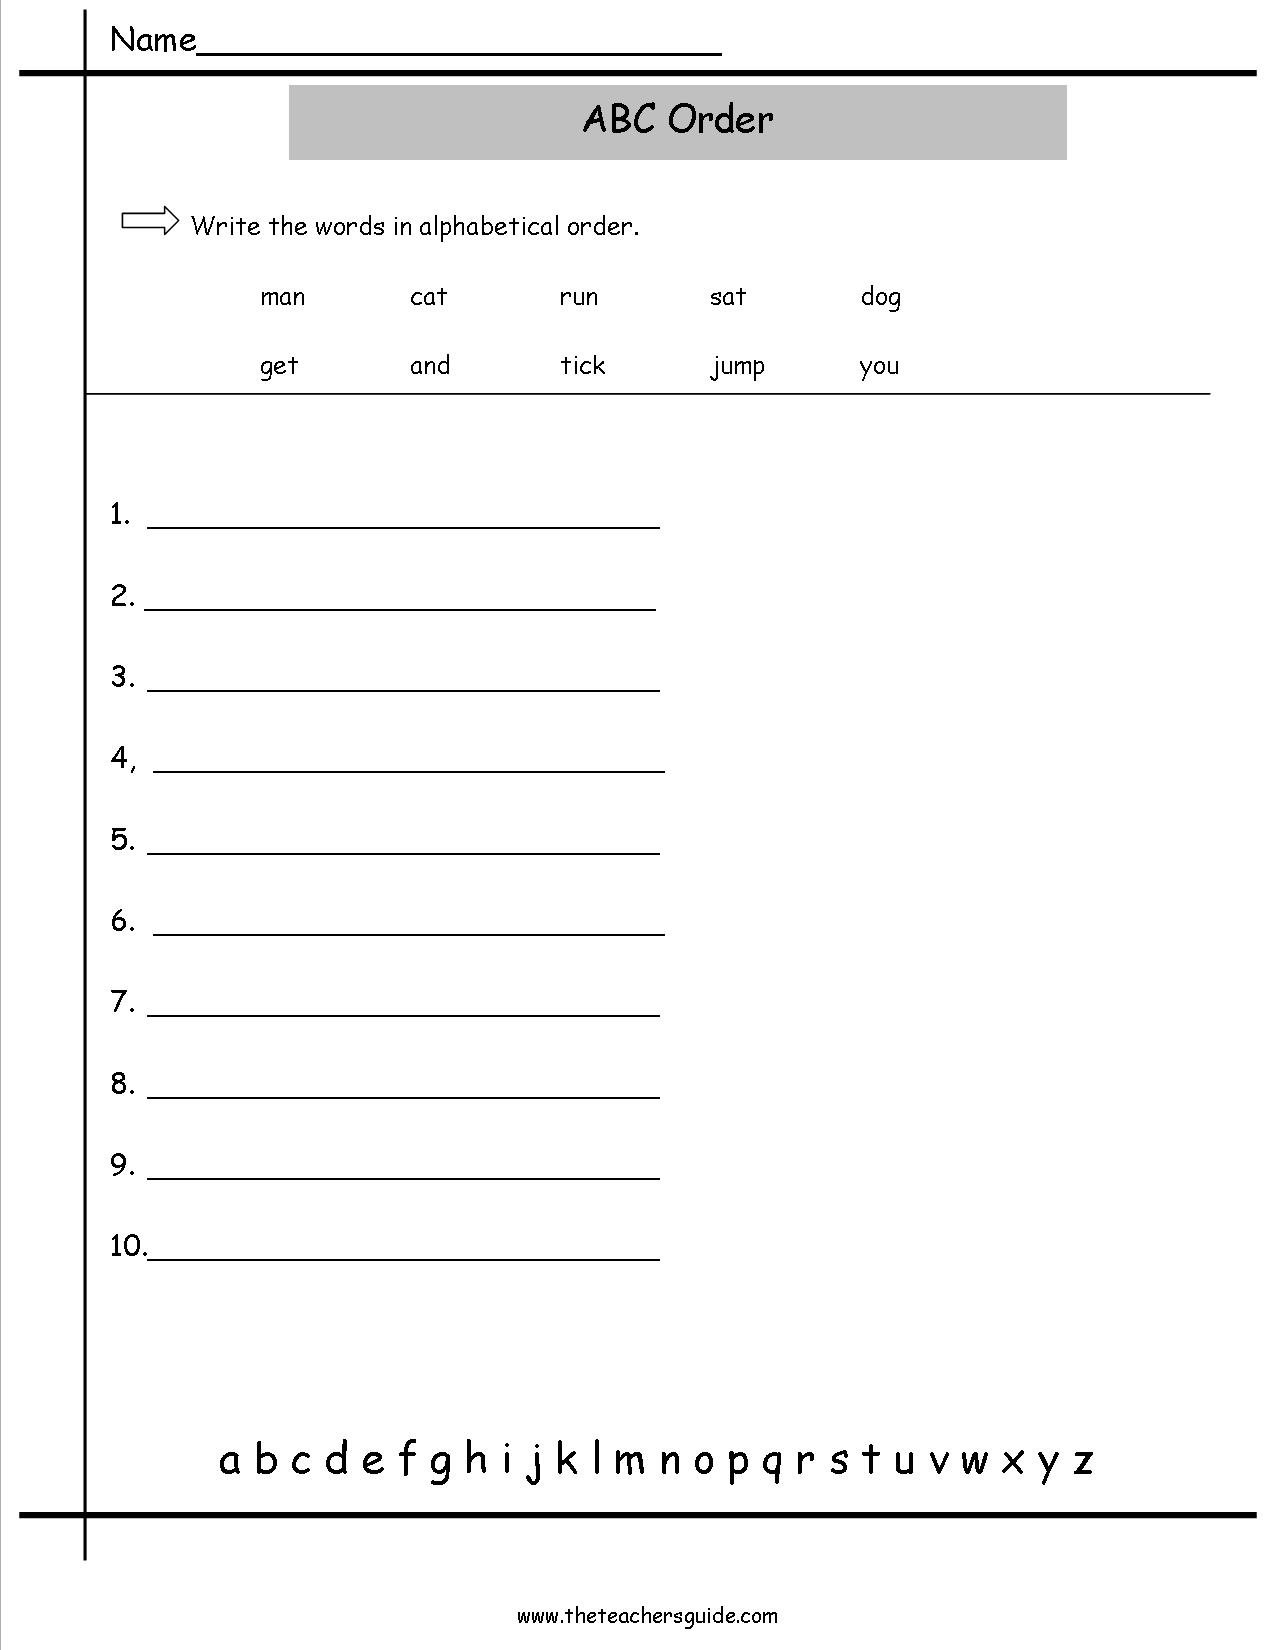 Abc Order Worksheets From The Teacher's Guide With Alphabetical Order Worksheets